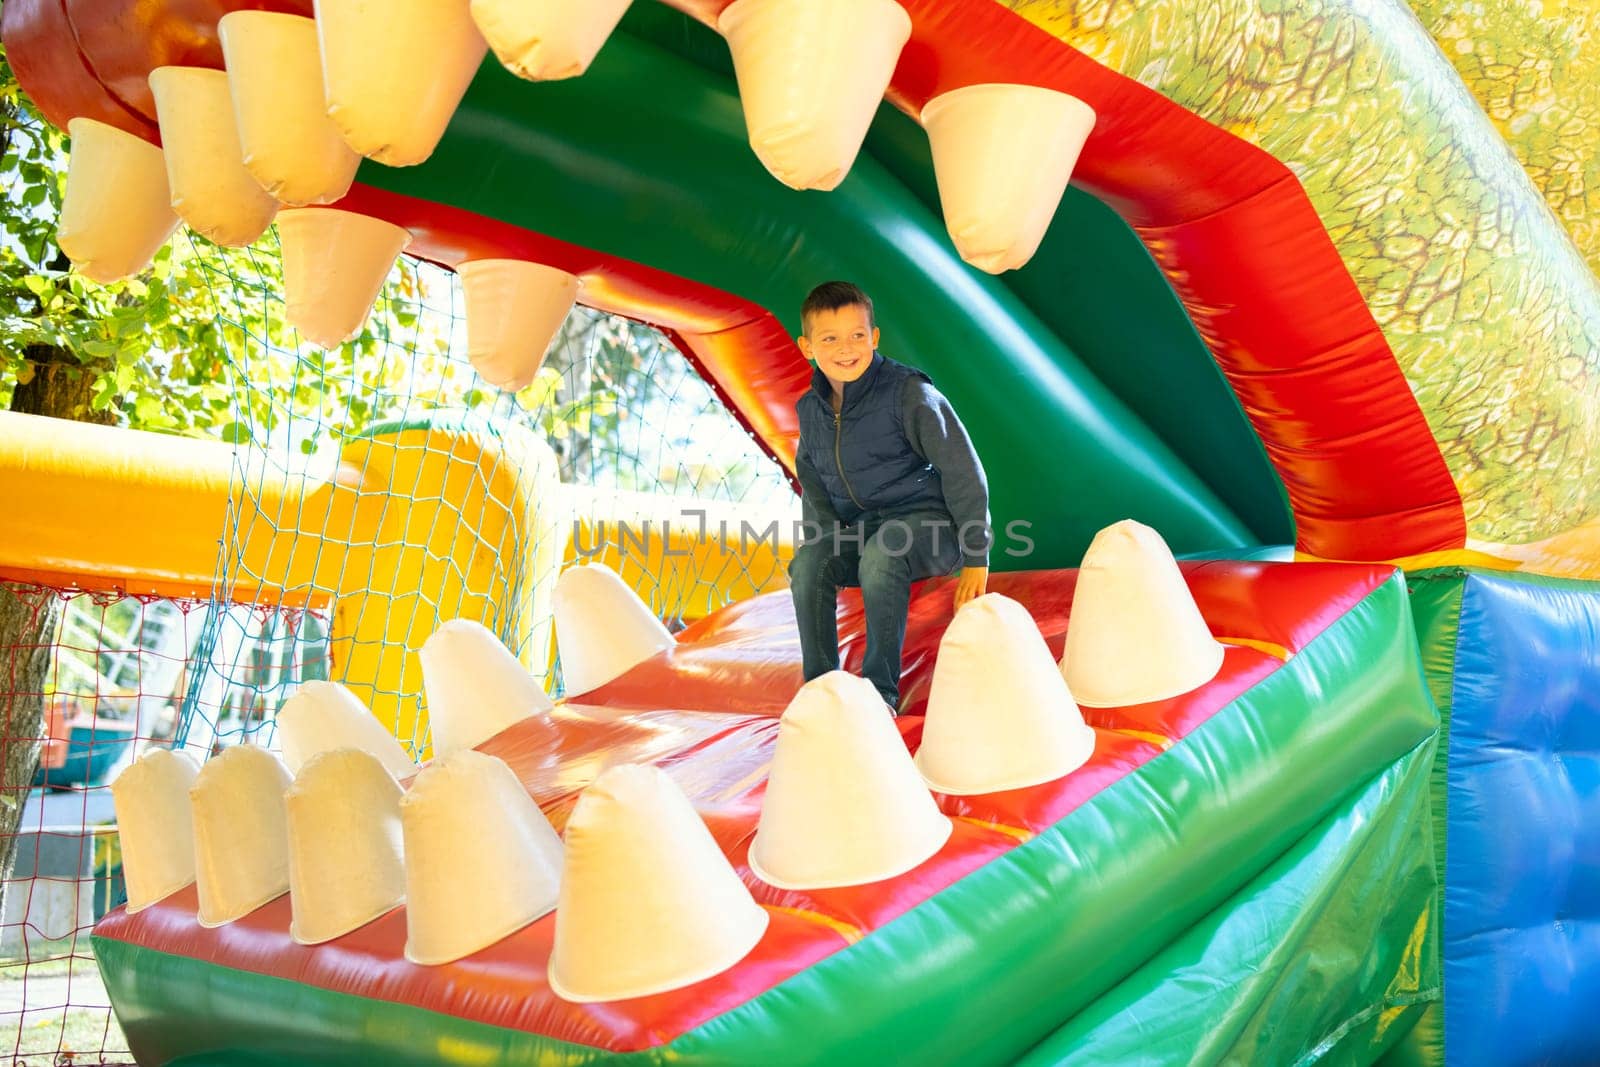 Happy boy having a lots of fun on a colorful inflate castle. Colorful playground. Activity and play center for kids.